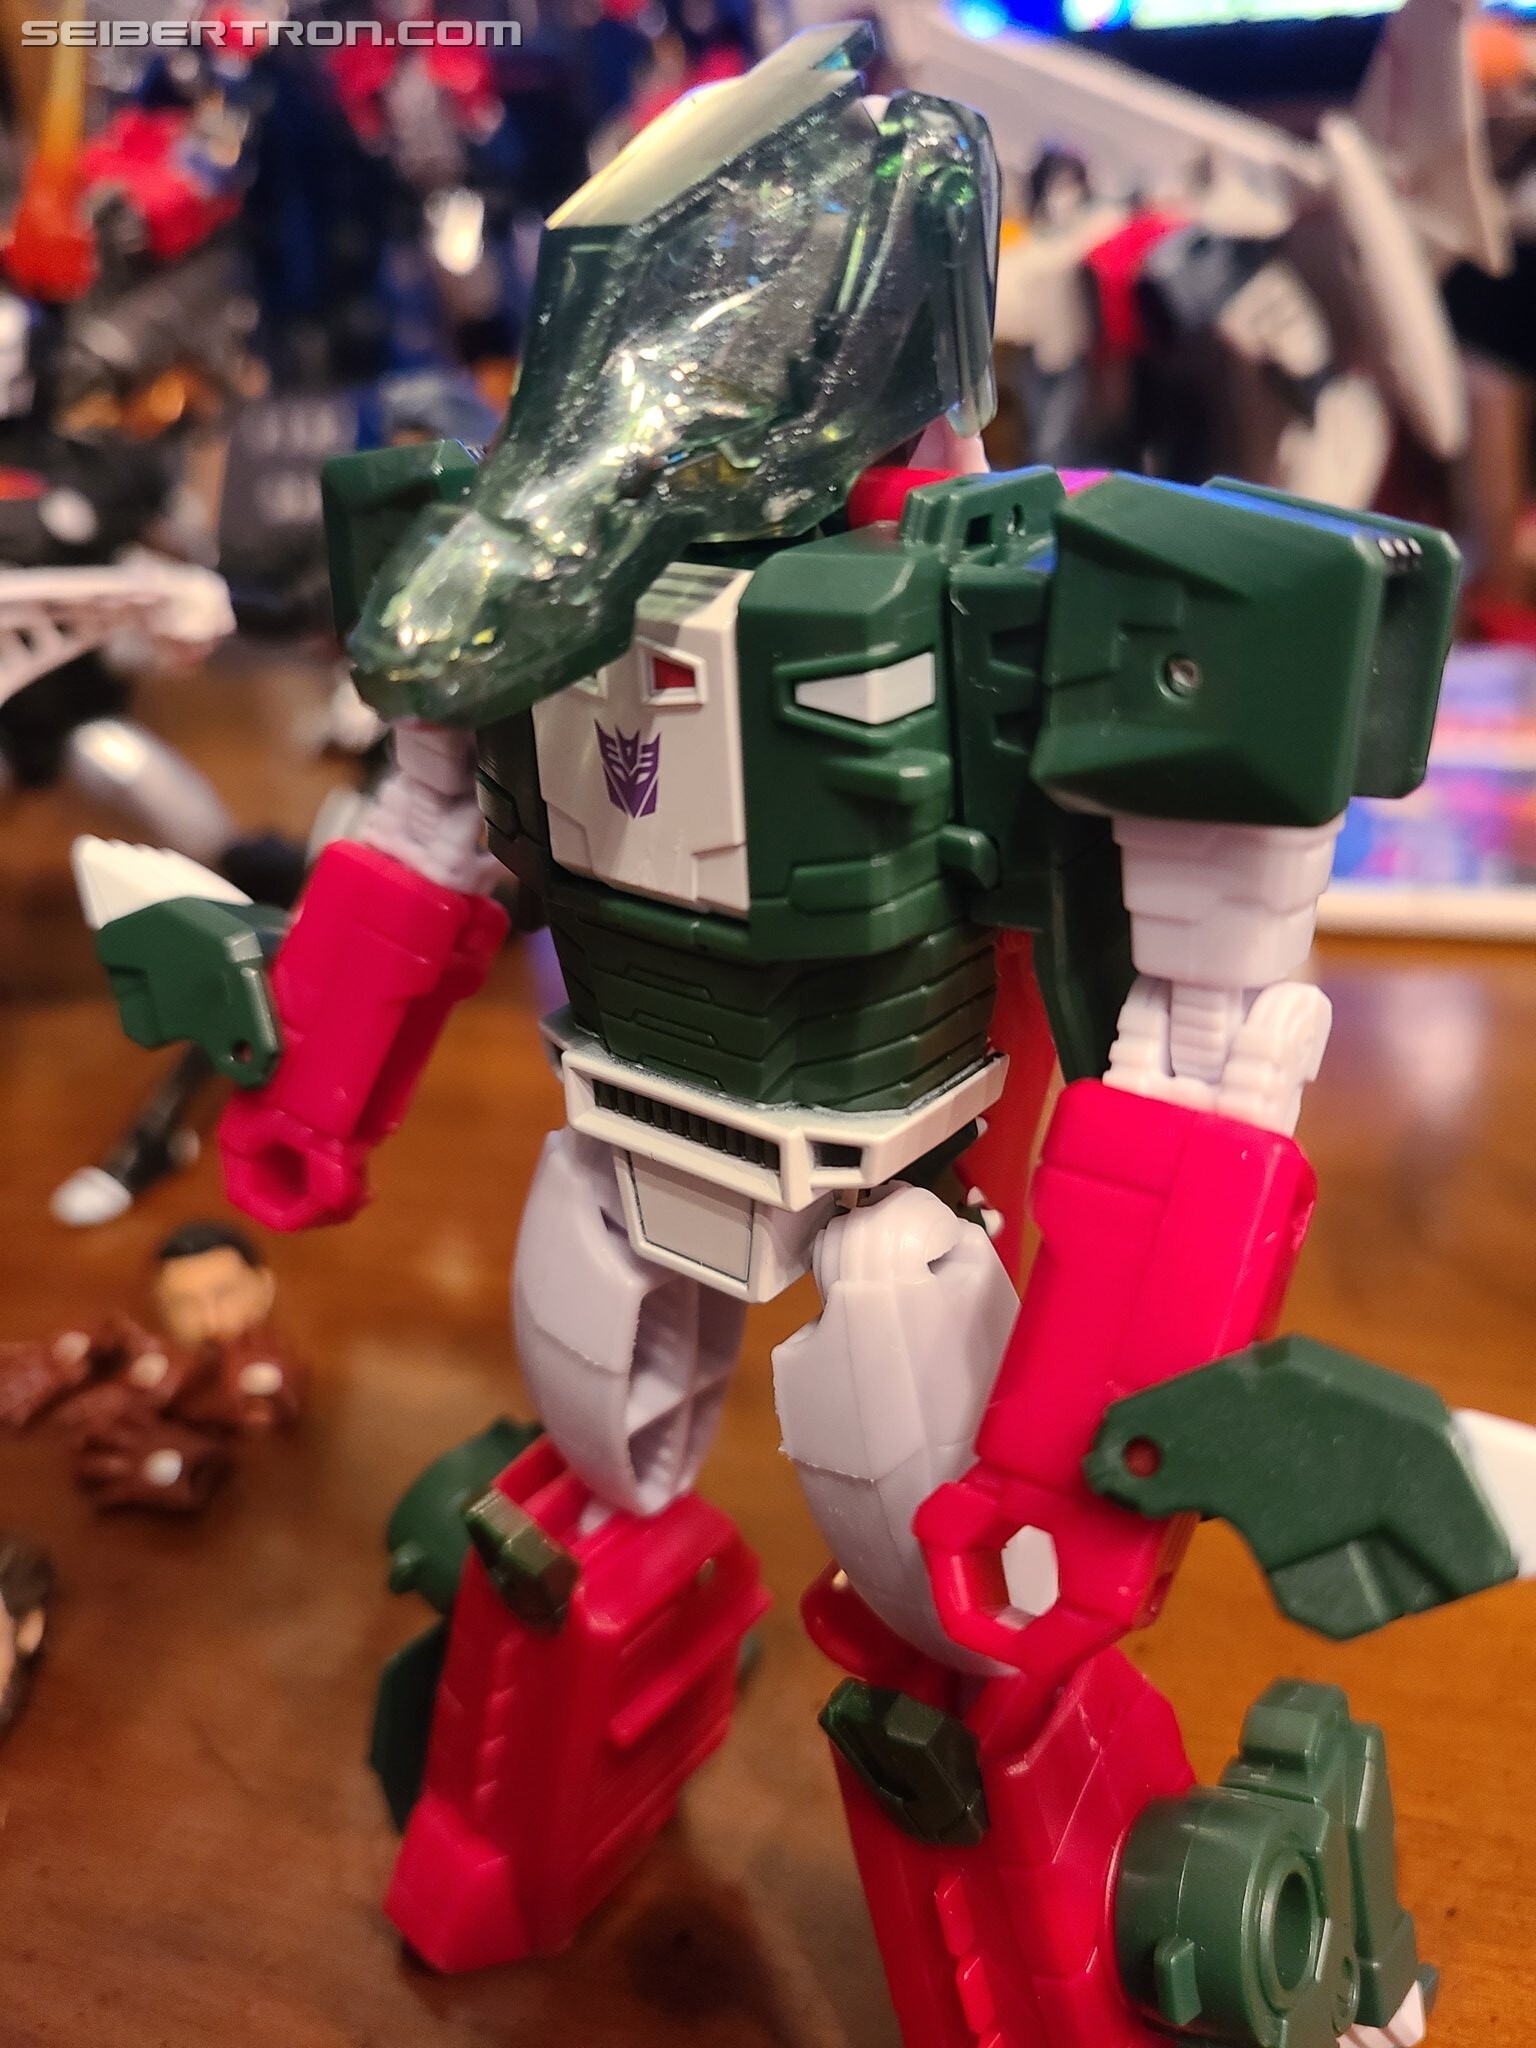 Blog #1631: Toy Review: Transformers: Cyberverse Ultimate